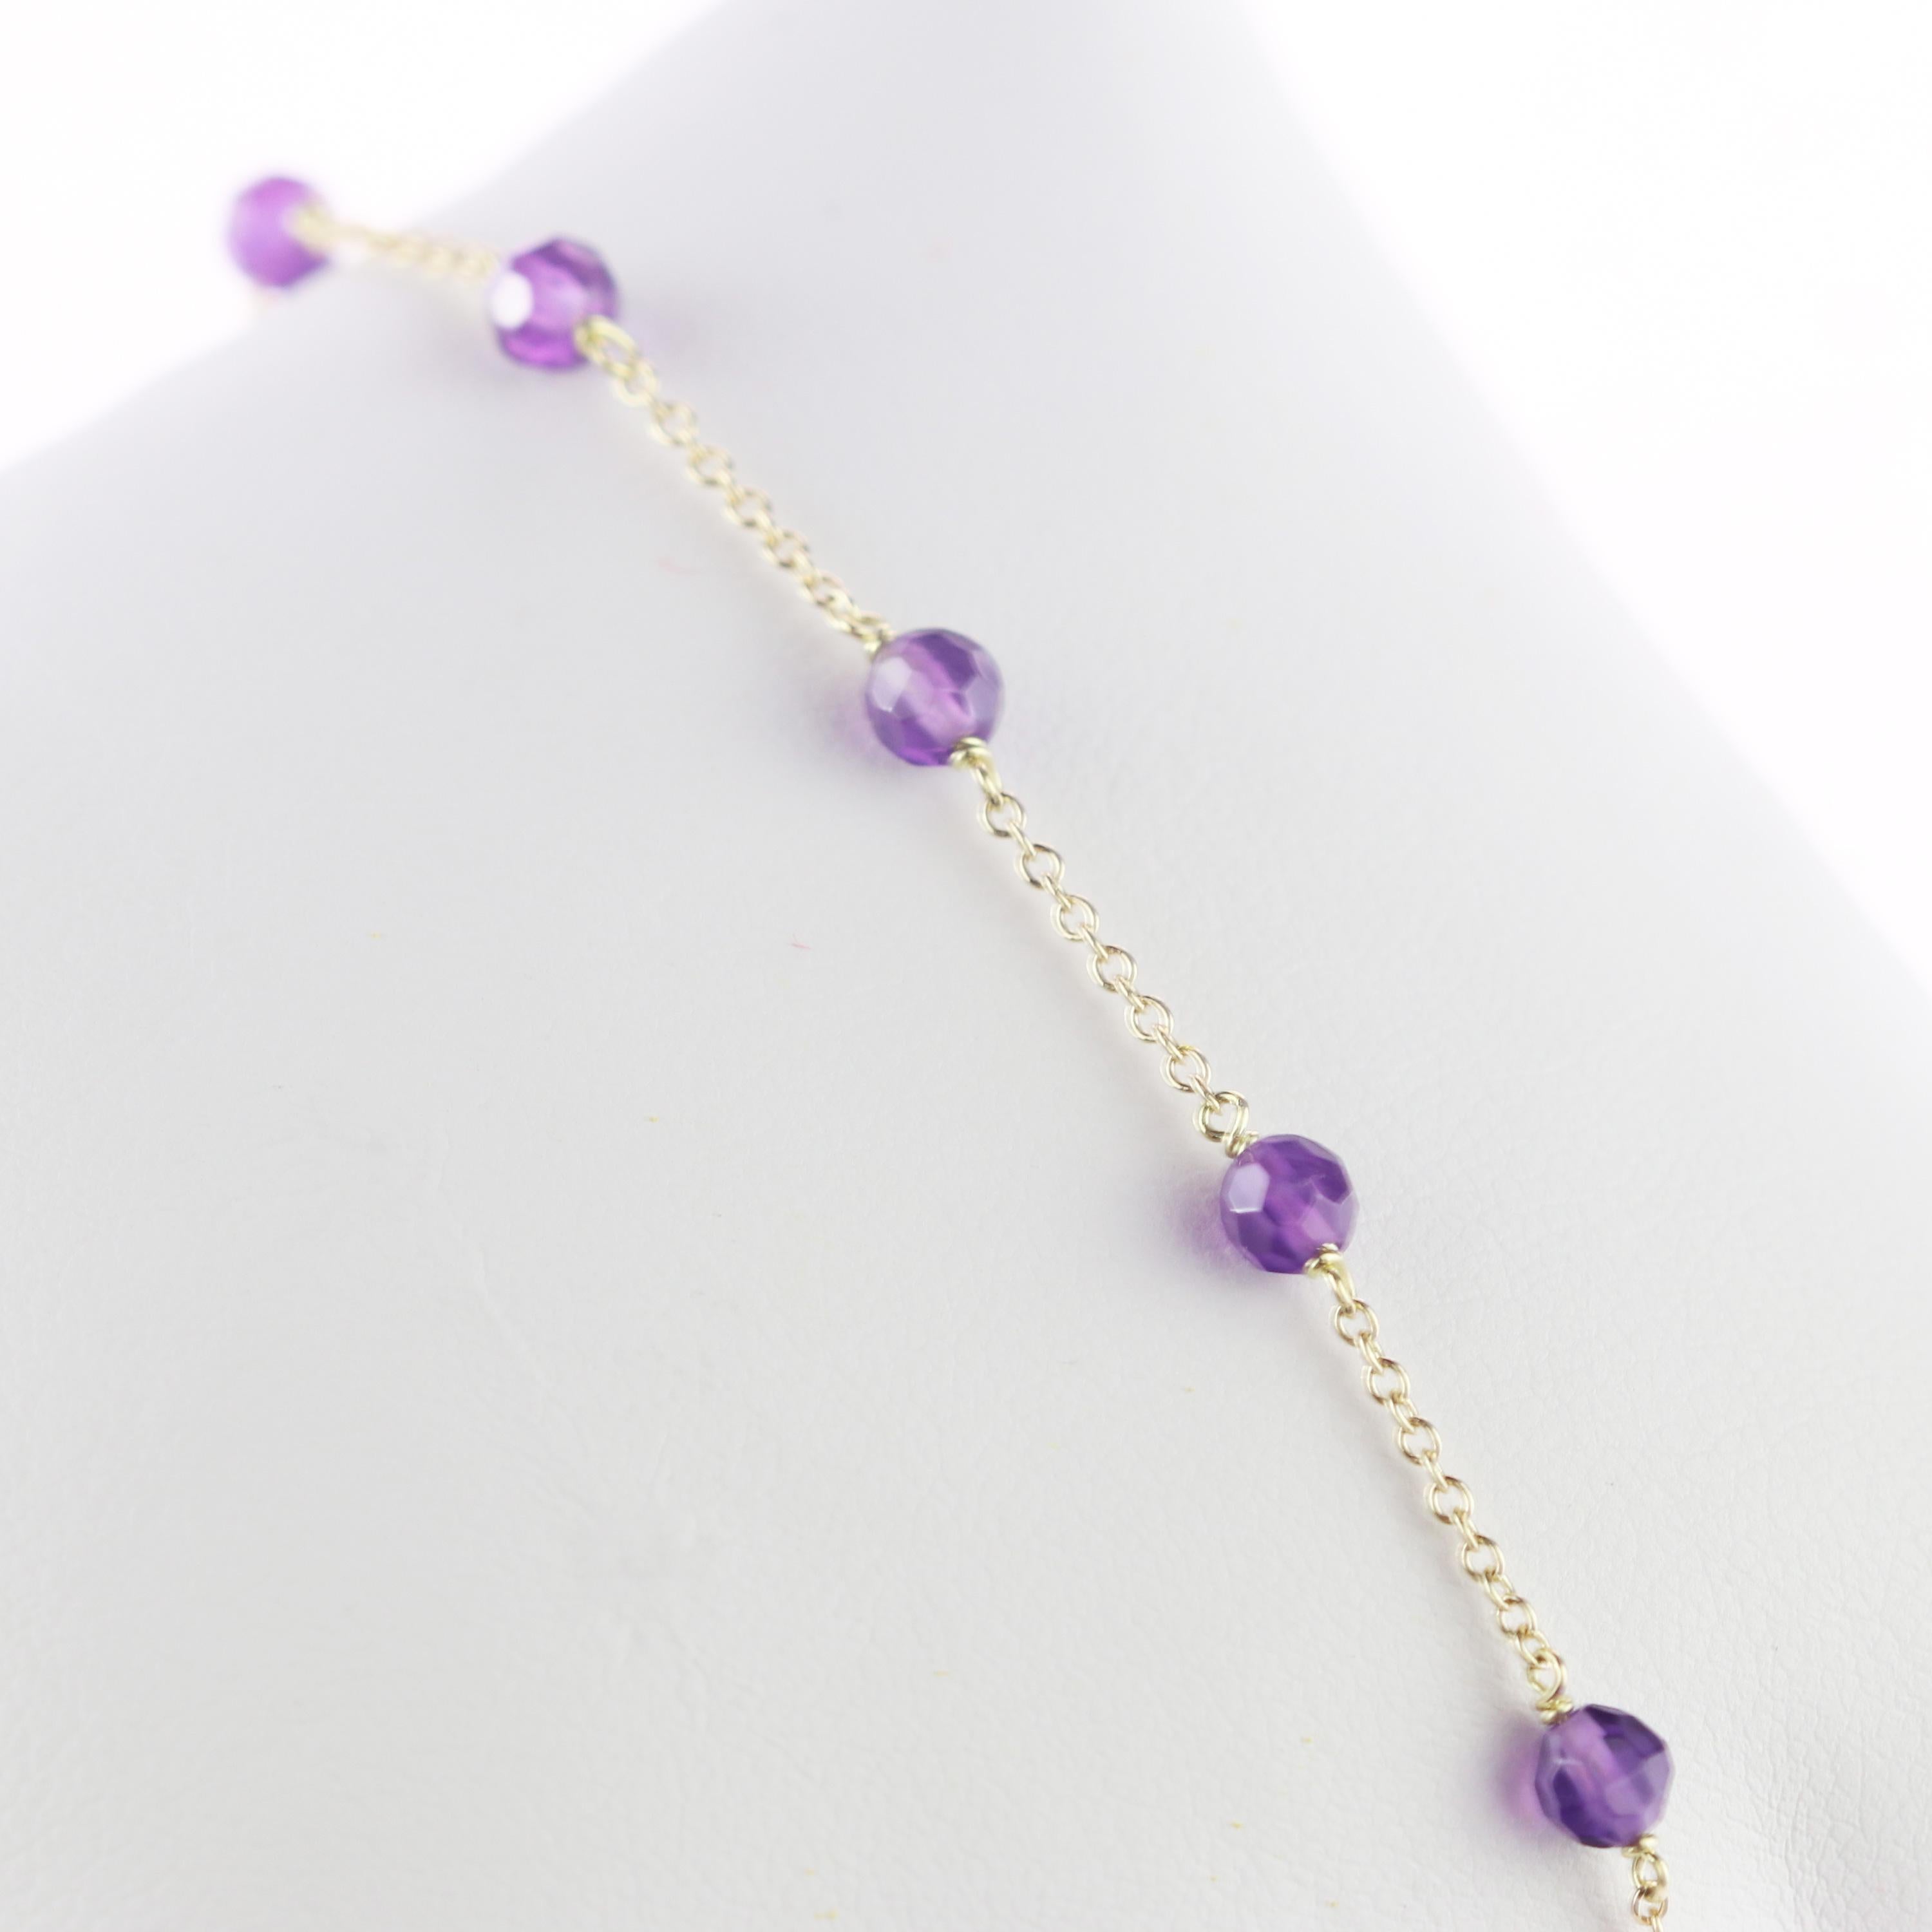 Marvellous bracelet starring natural amethyst beads, for a bright charm of uniqueness. Luminous jewel with natural precious jewellery on elegant 9 karat yellow gold setting.

Amethyst is marked as the stone for the month of February. Amethyst is the